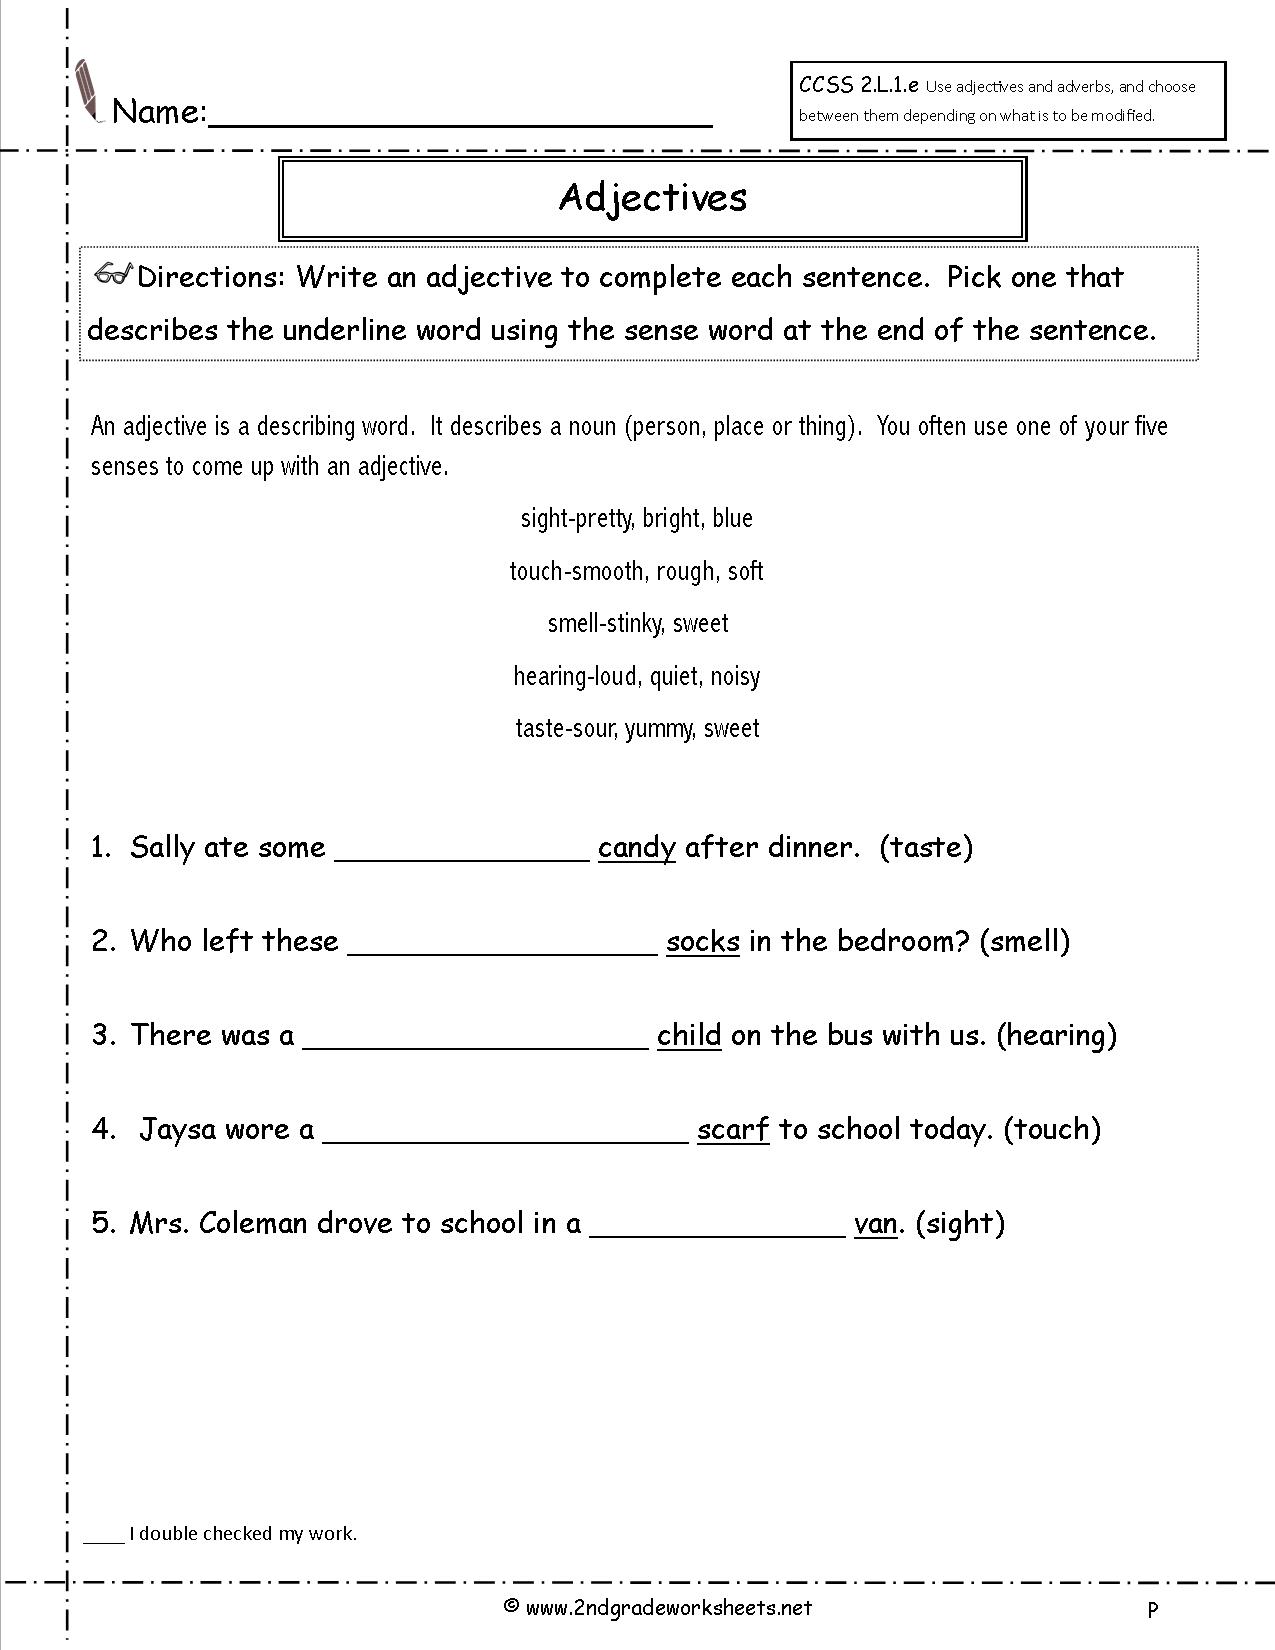 Worksheet For Adjectives For Class 2